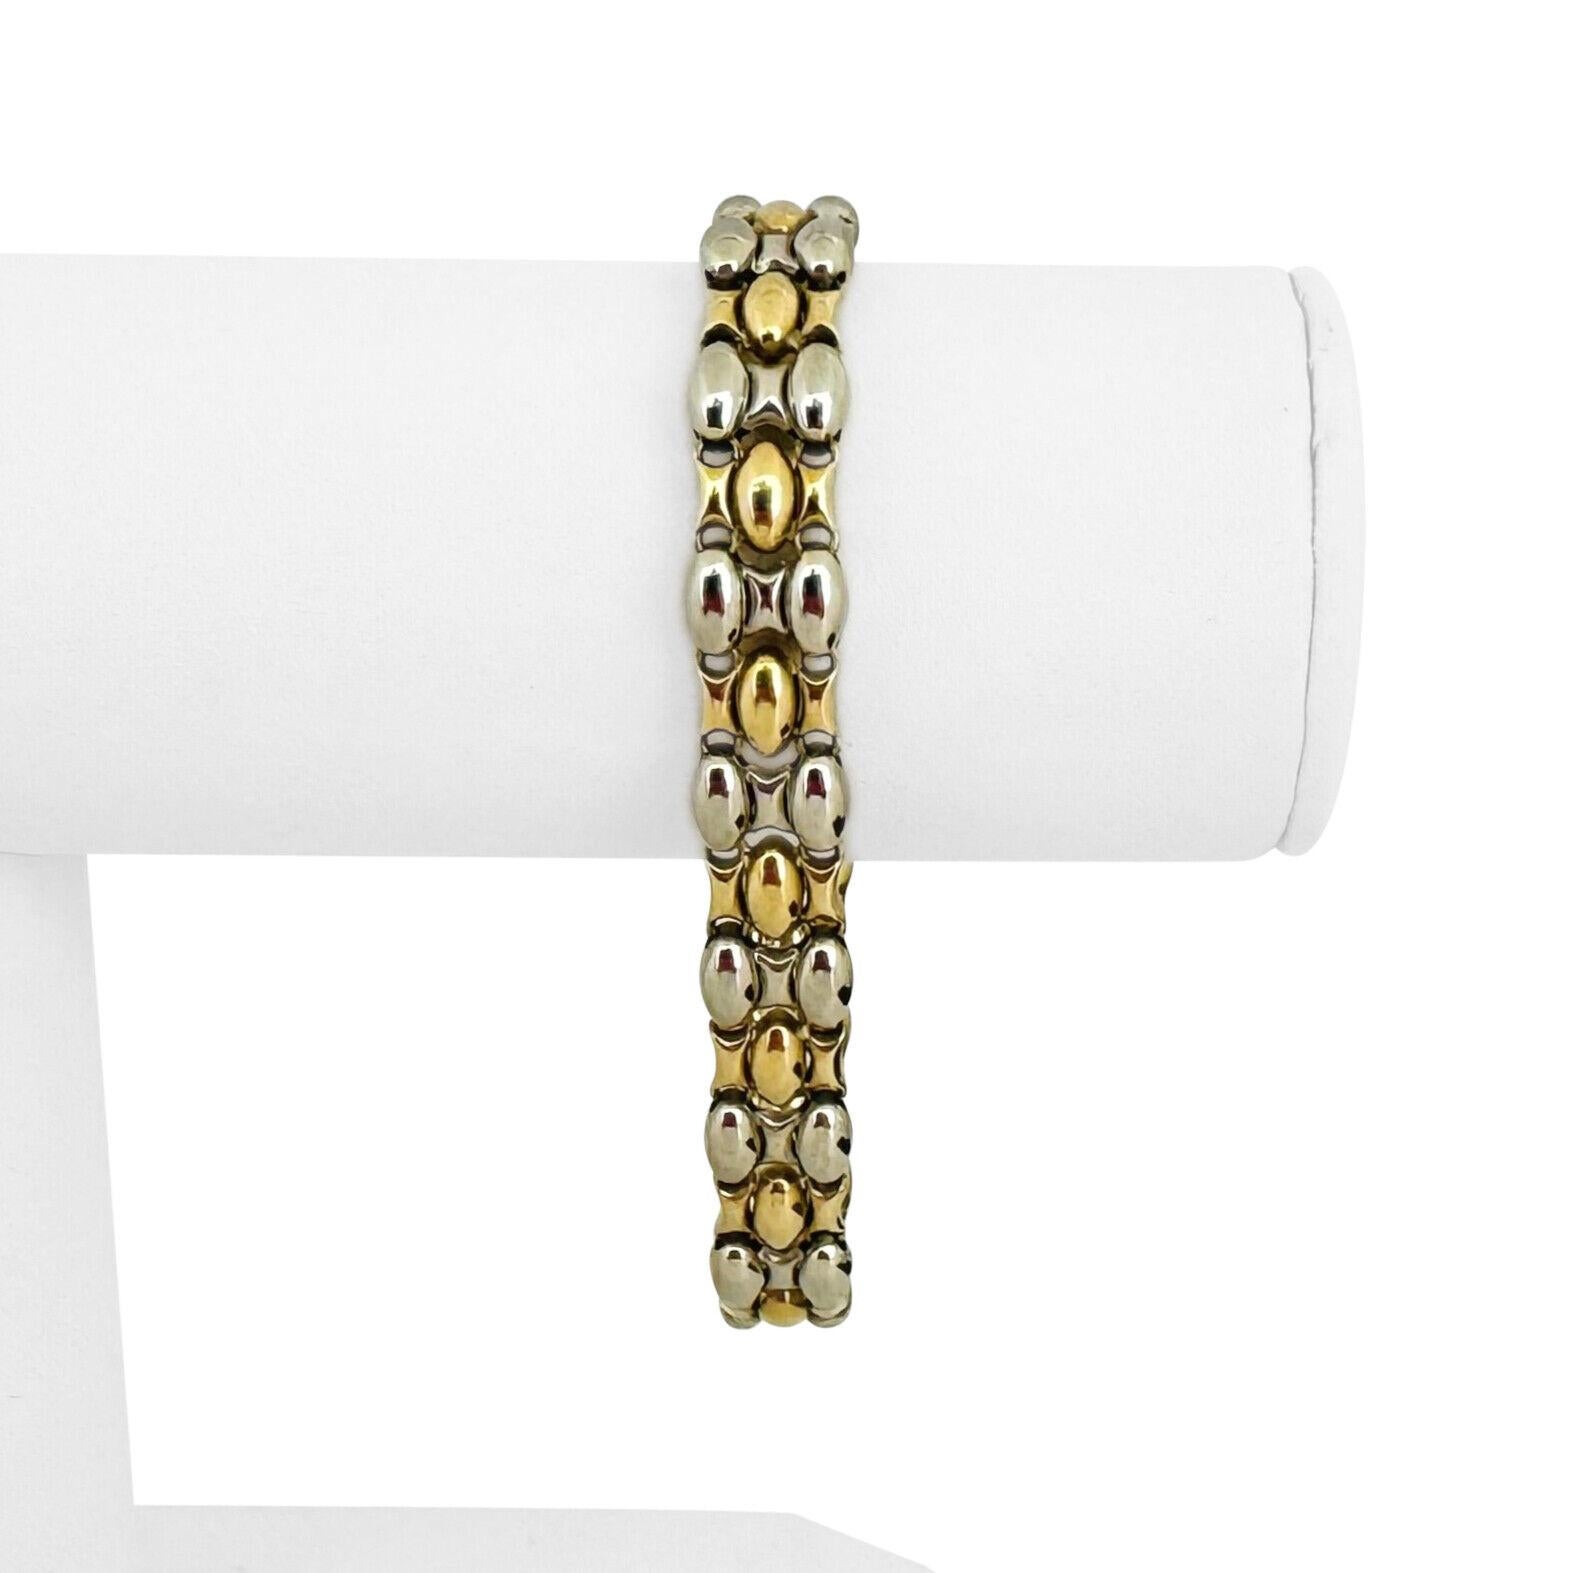 Chimento 18k Yellow and White Gold 19g Two Tone Fancy Link Bracelet Italy 7.75